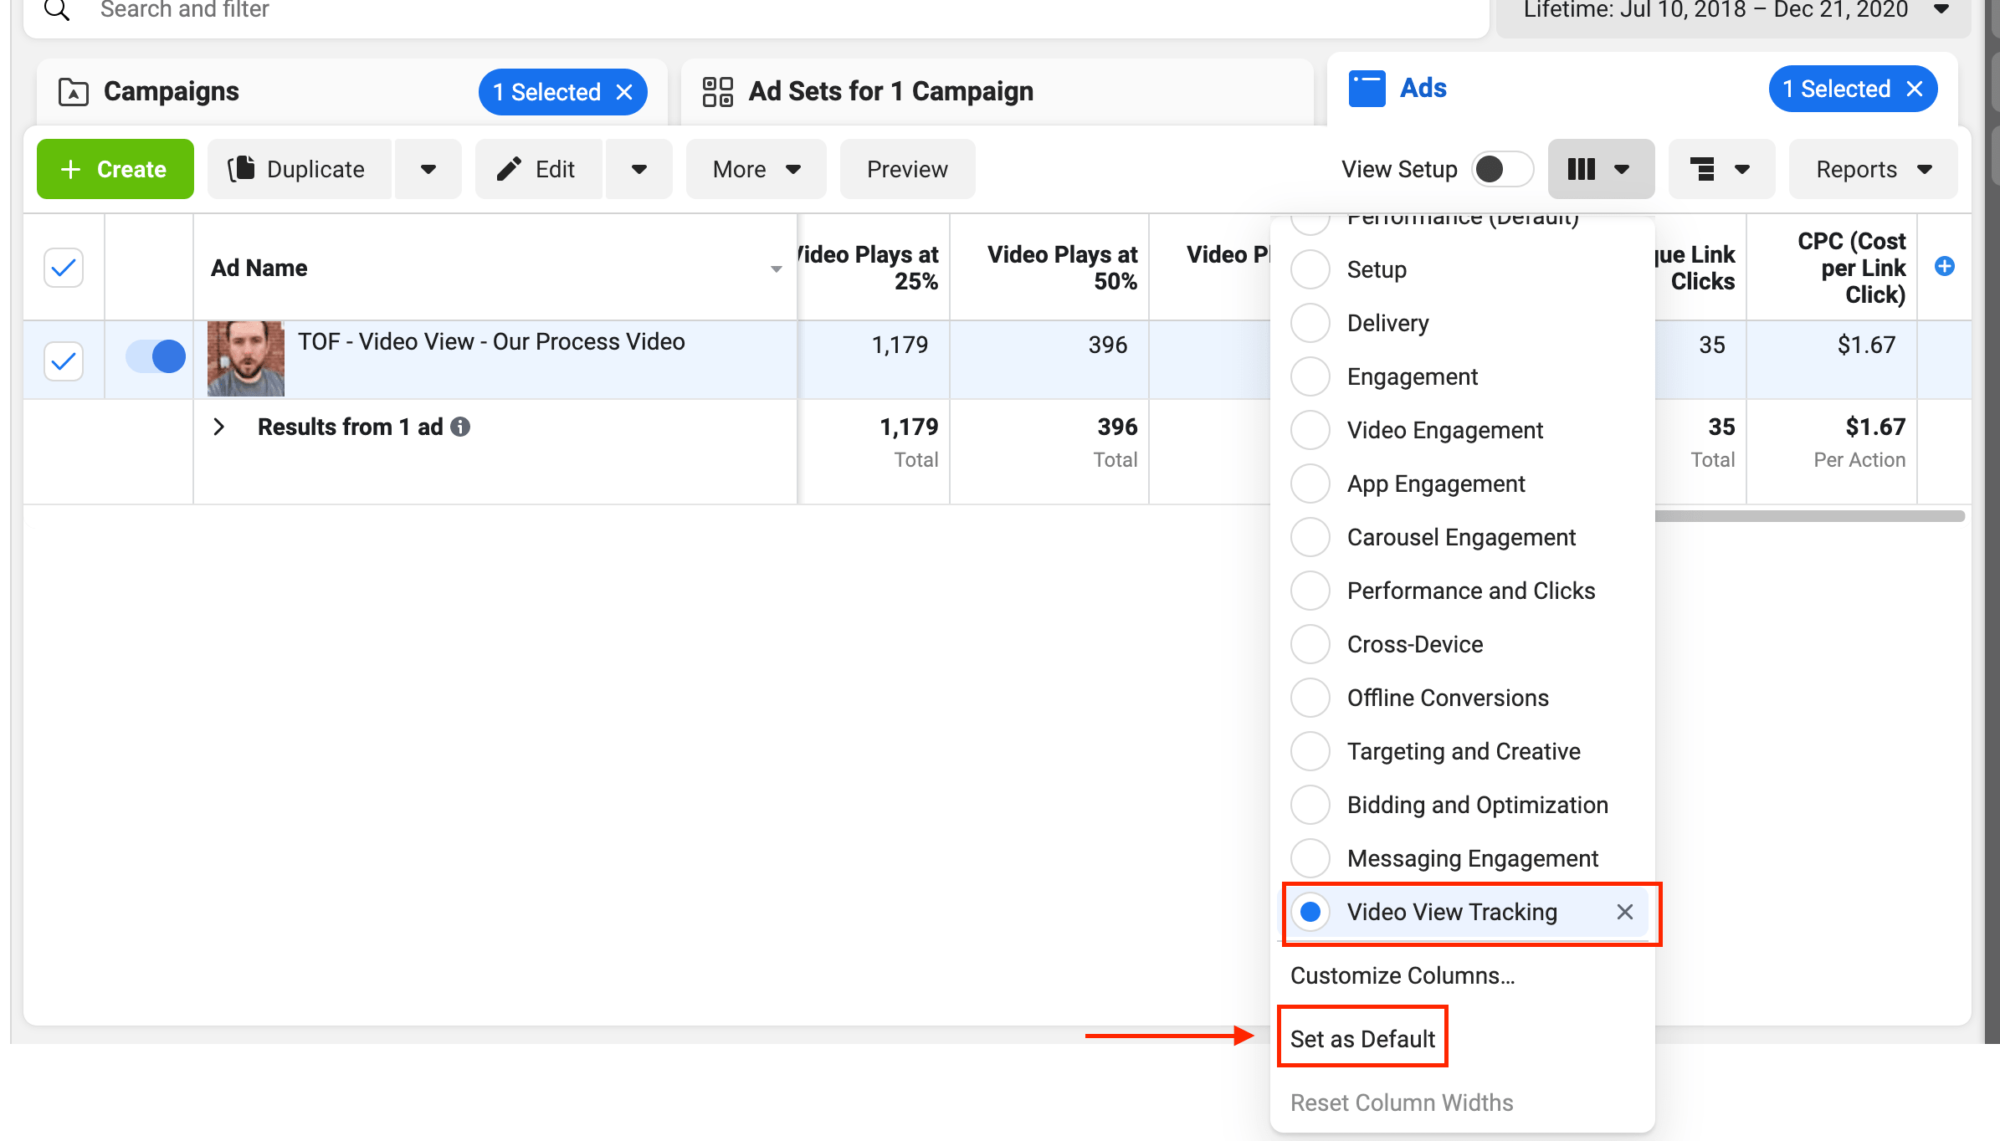 You can set your custom view as the default view when reviewing your ad metrics.